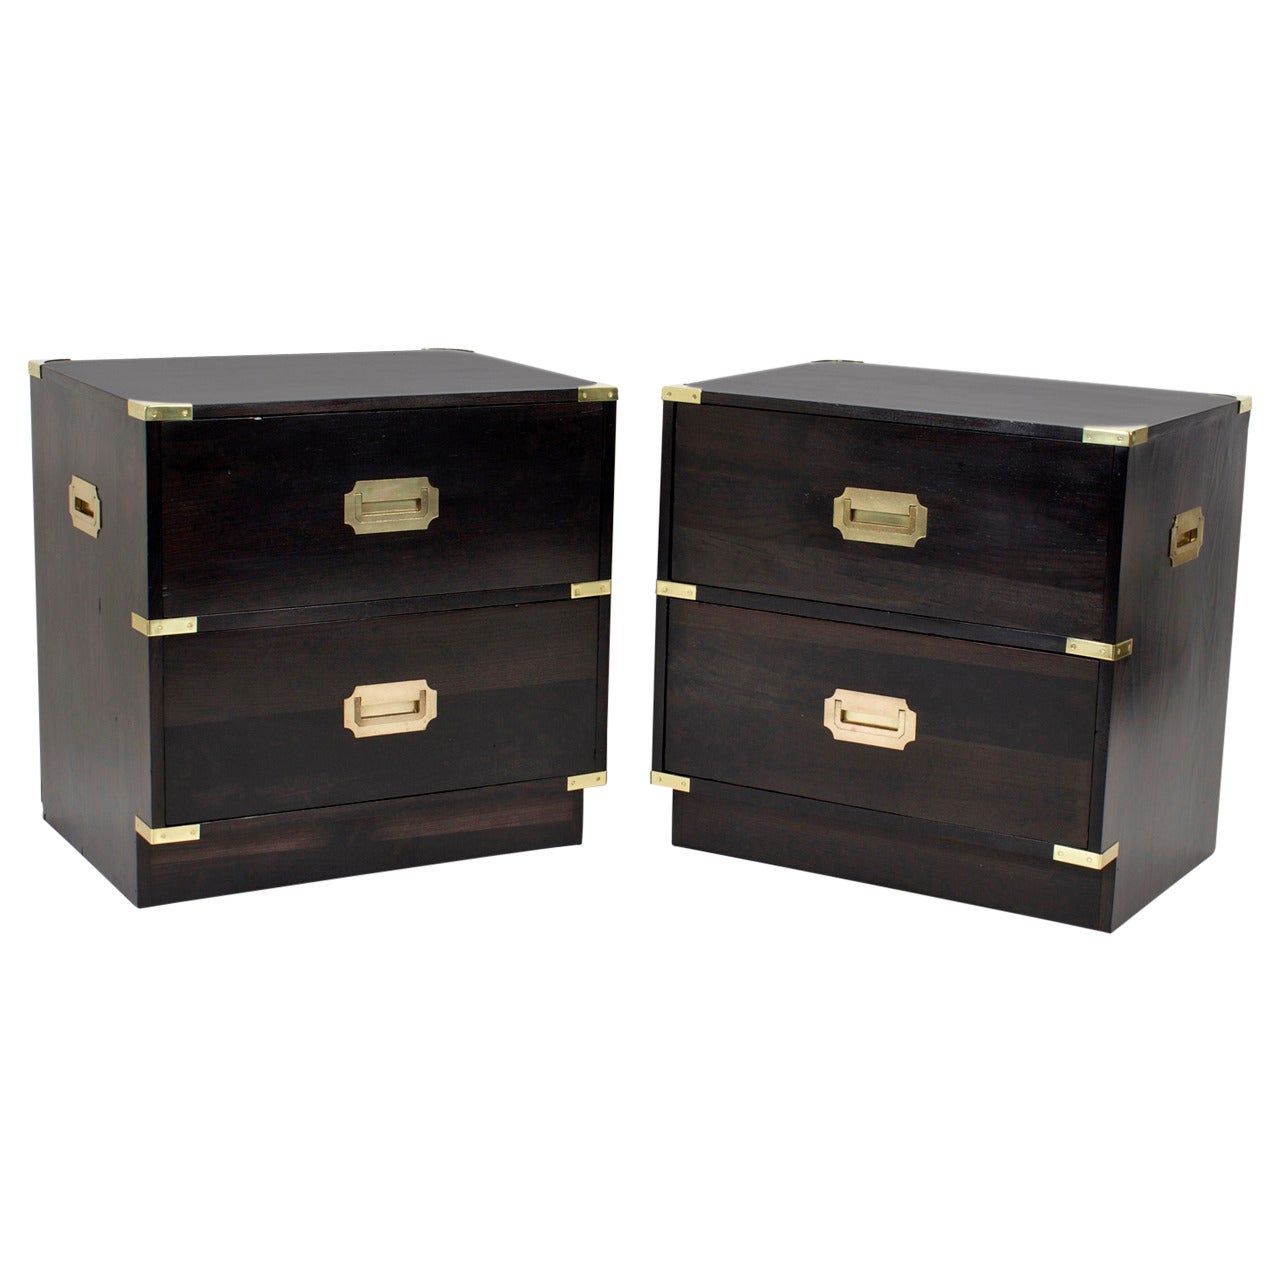 Pair of 2 Drawer Ebonized Campaign Style Nightstands